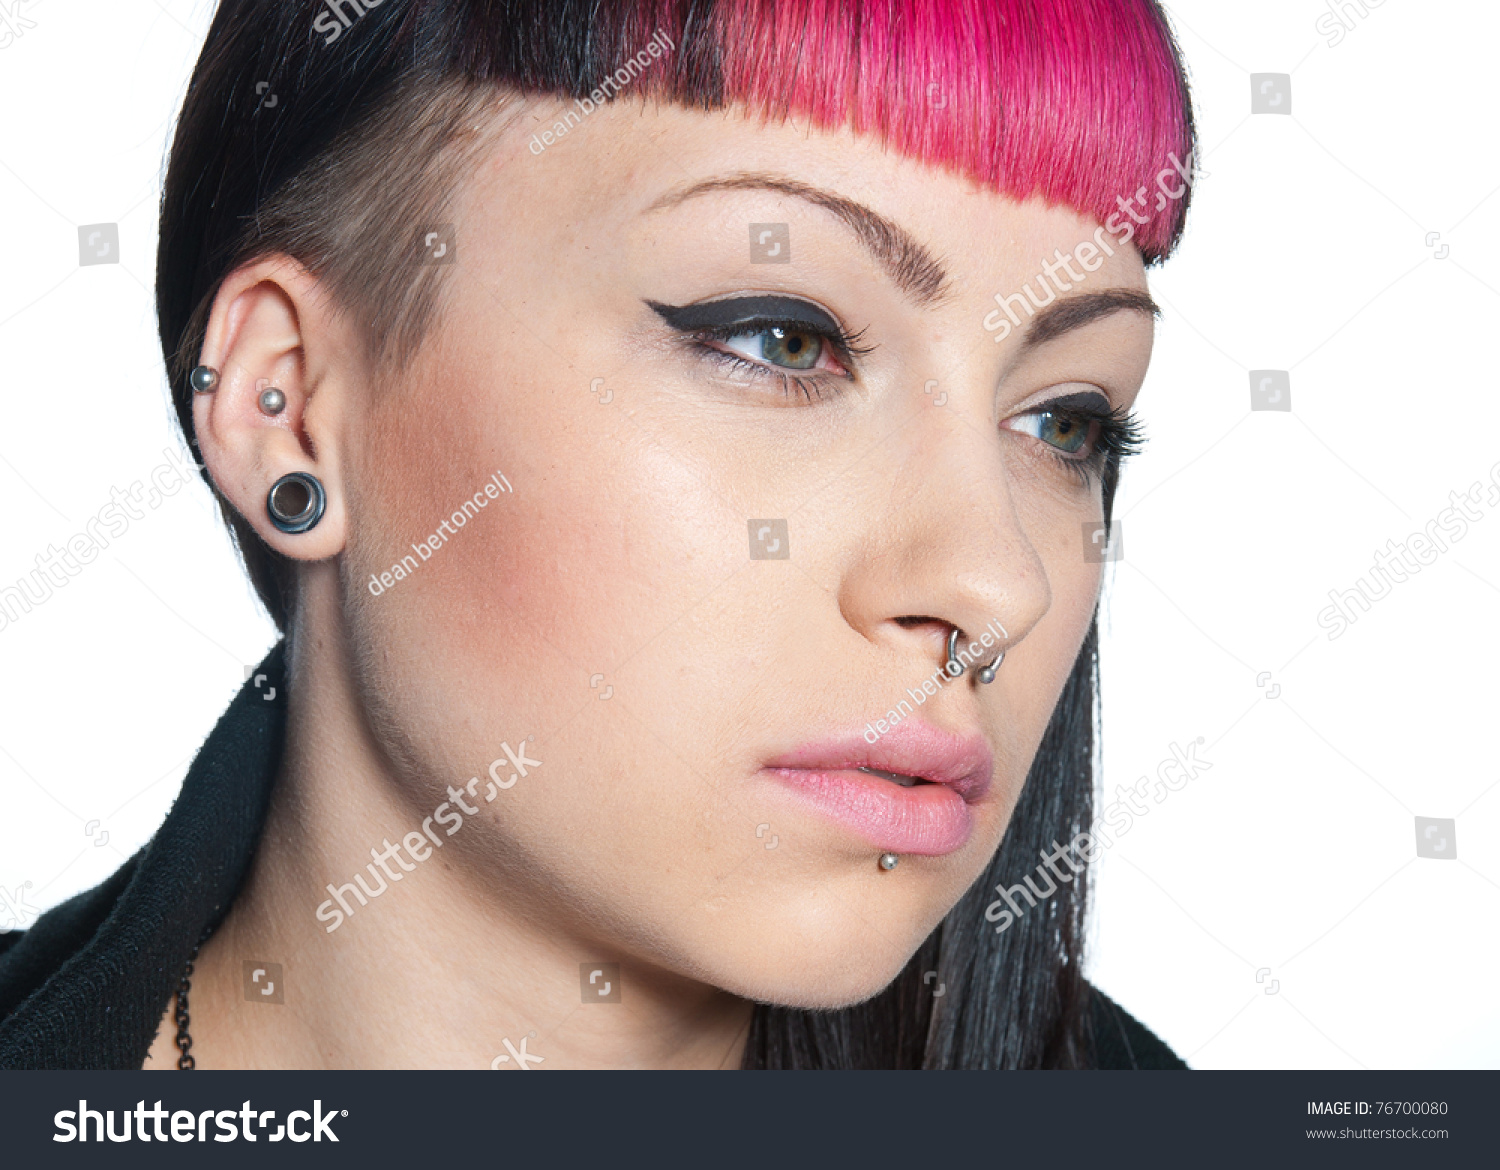 Teen Girl With Face Nose And Ear Piercings Stock Photo 7670008